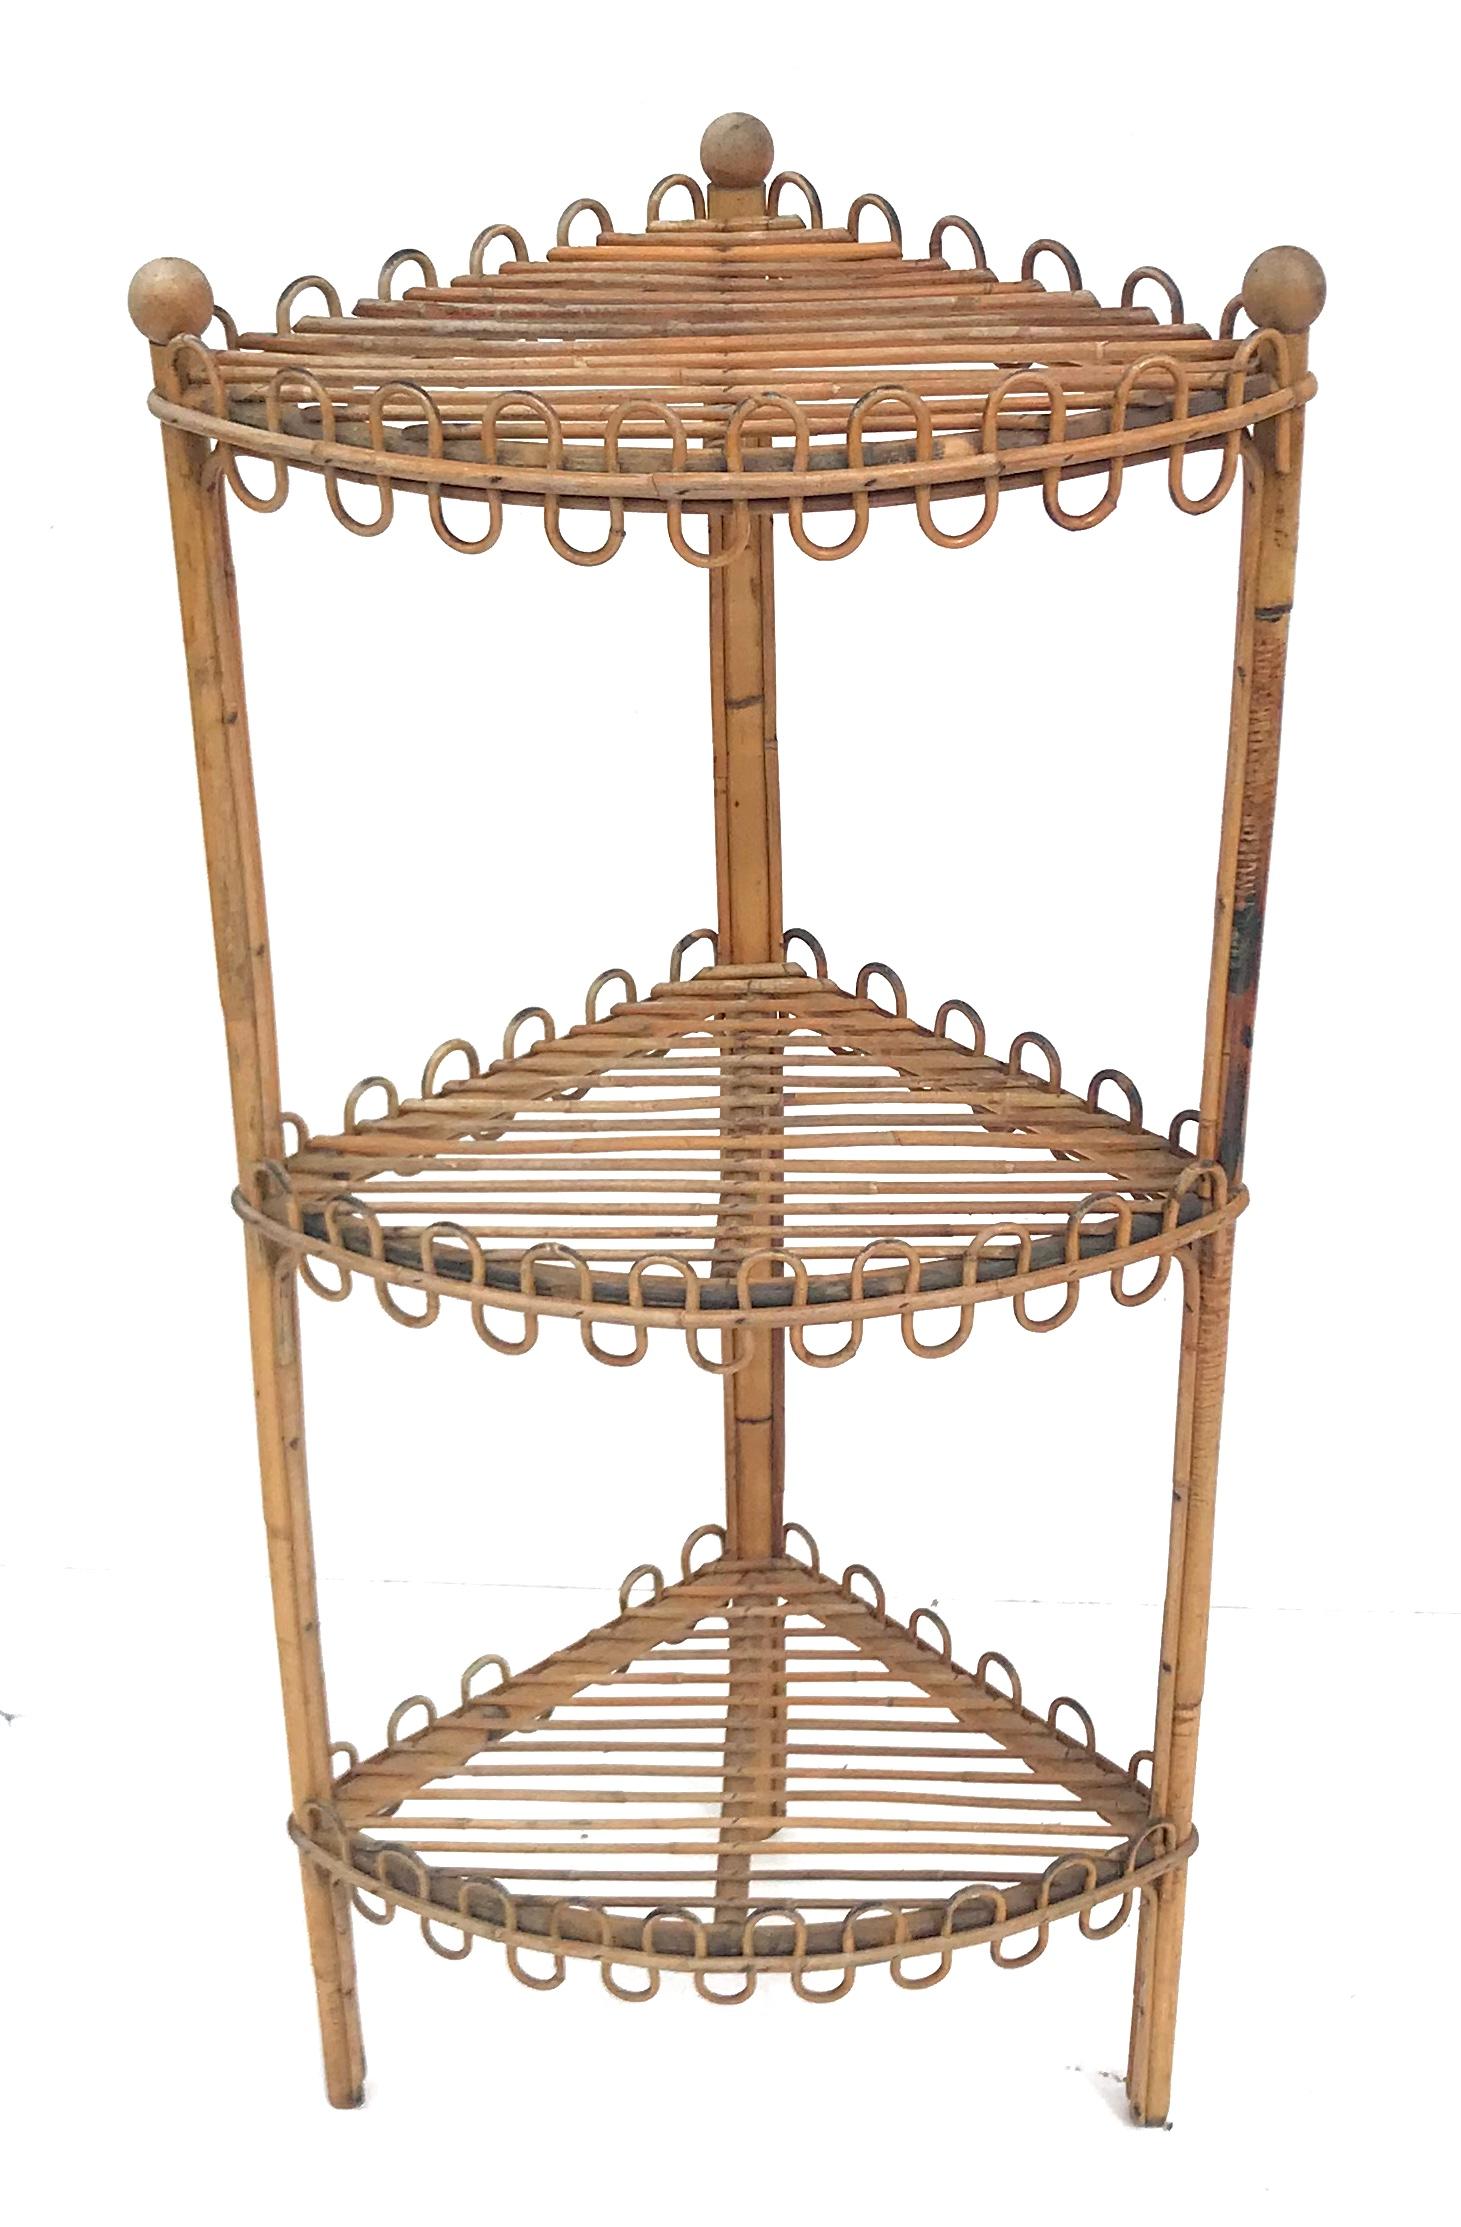 Wonderful sculpted French rattan corner shelf from the 1950s in the style of Jean Royere. We’ve never seen this form before!